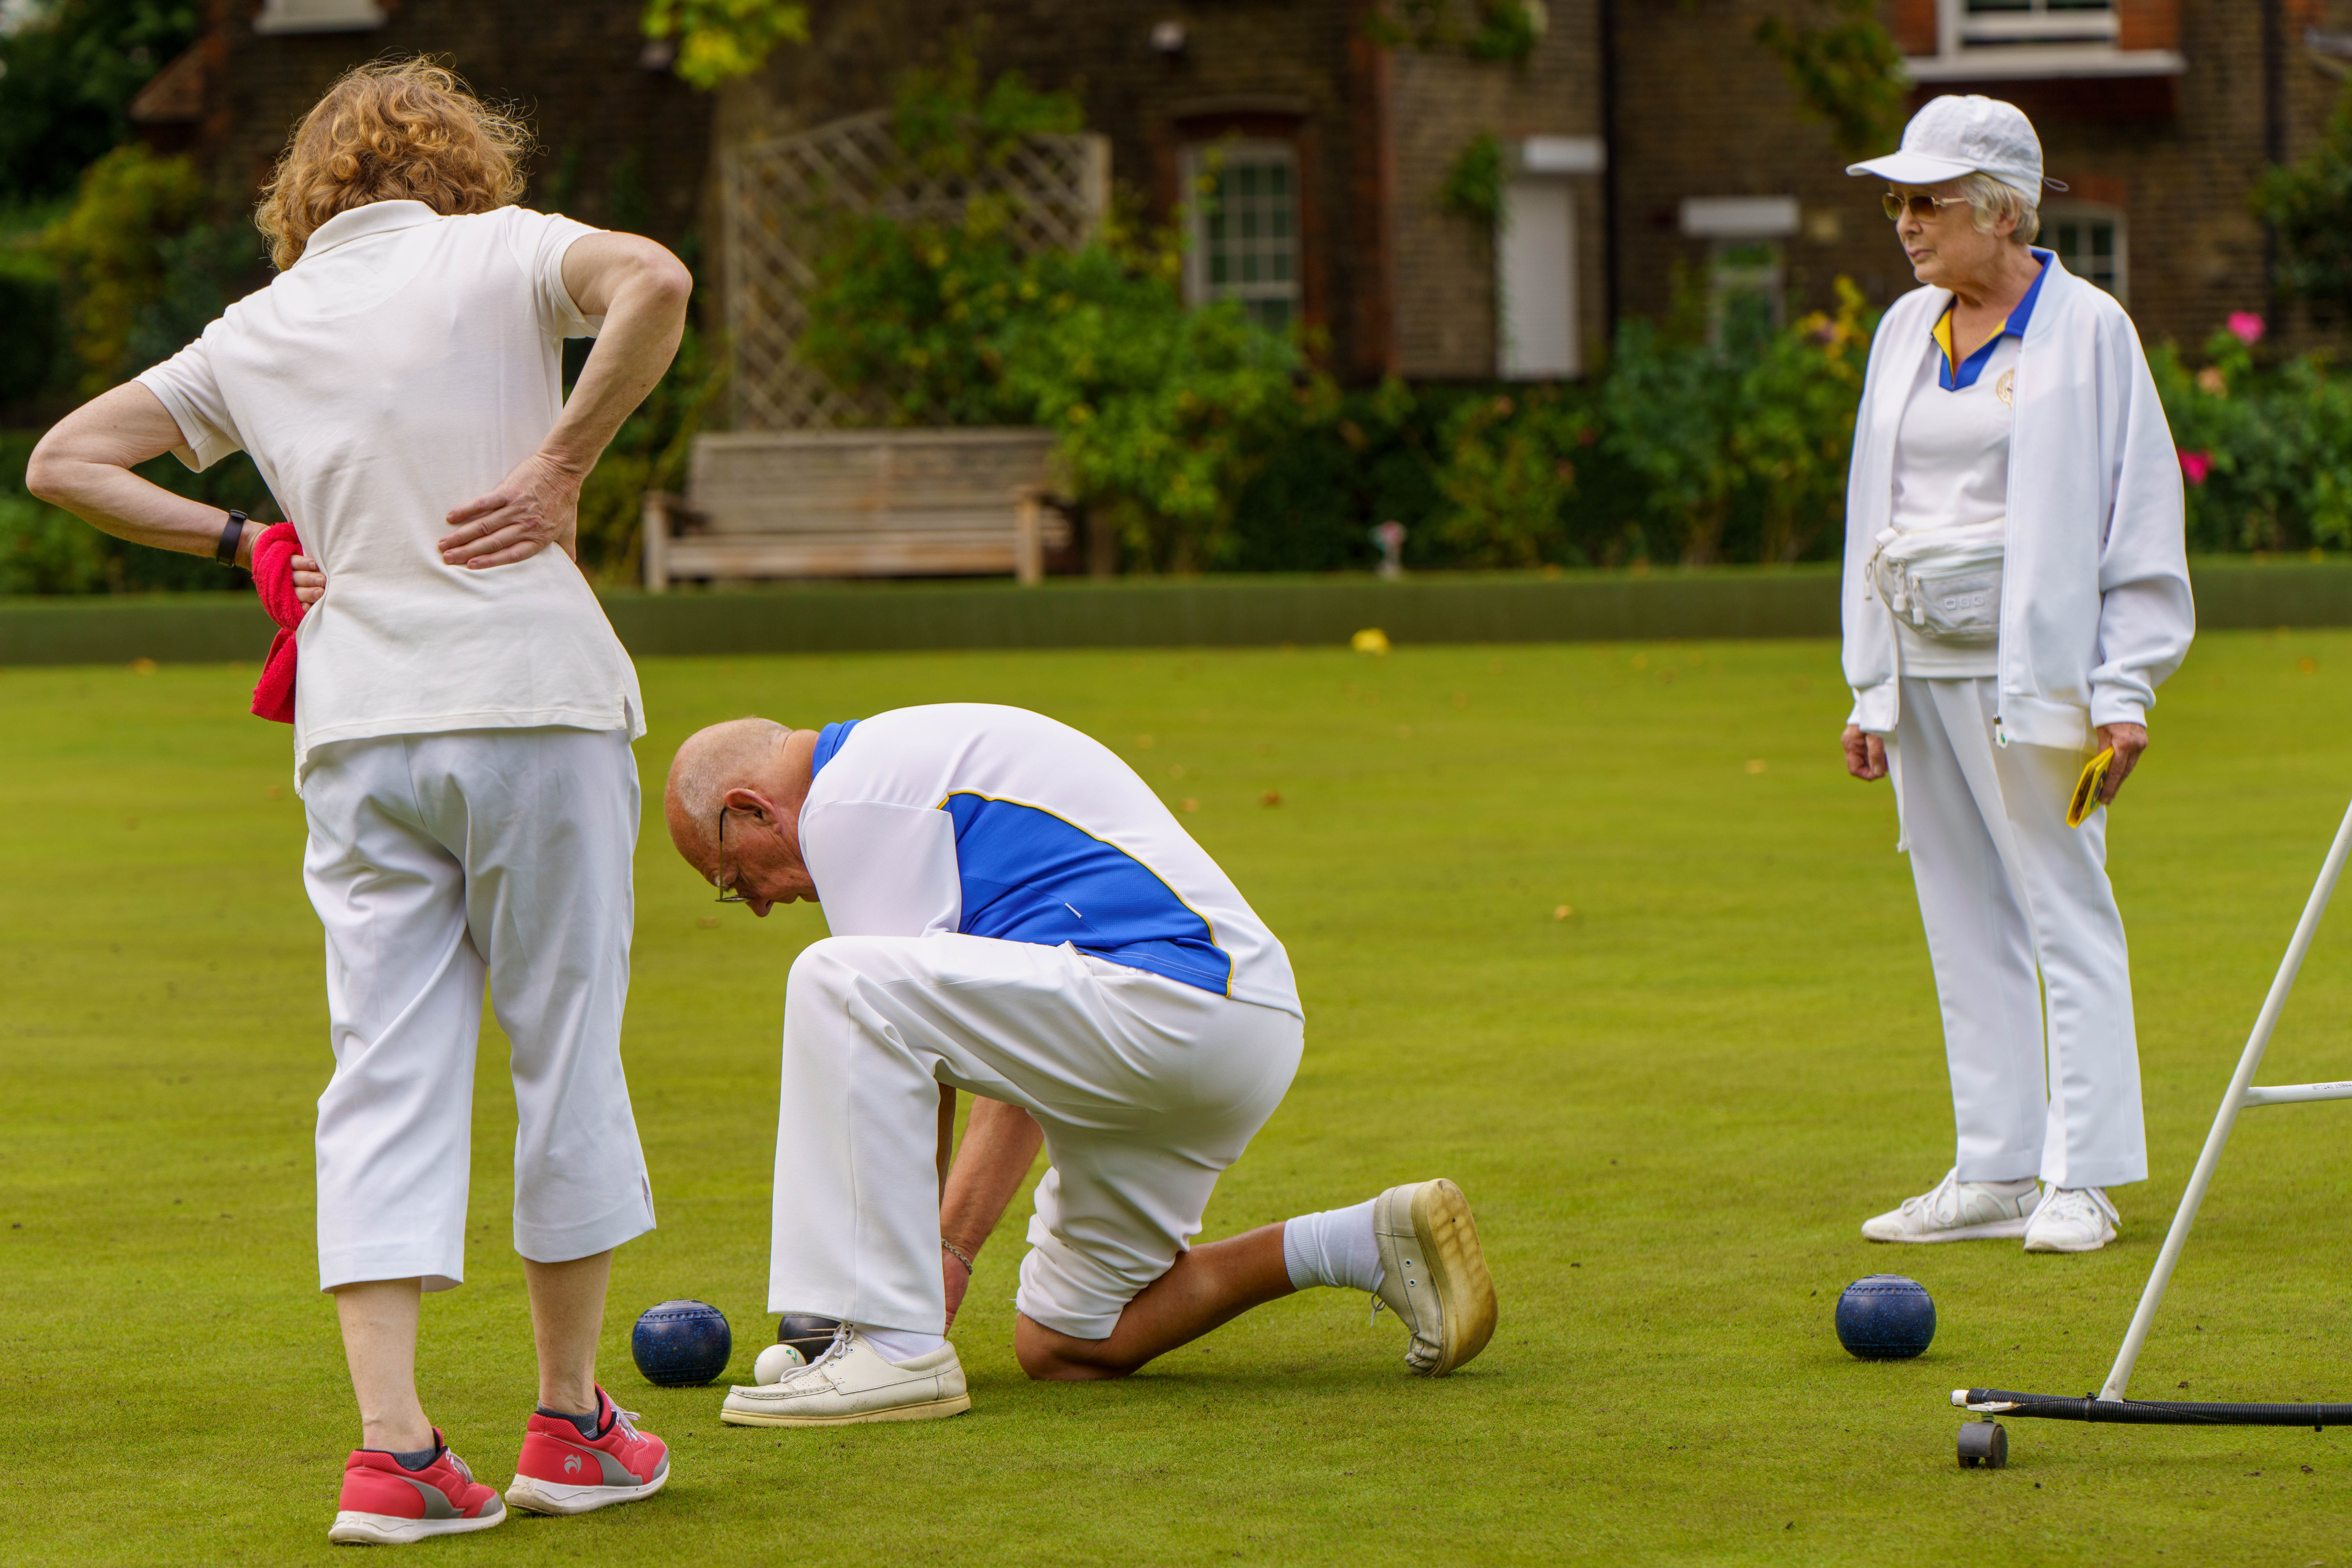 Francis Drake Bowls Club, Hilly Fields, Brockley, SE4 1QE. Presidents Cup